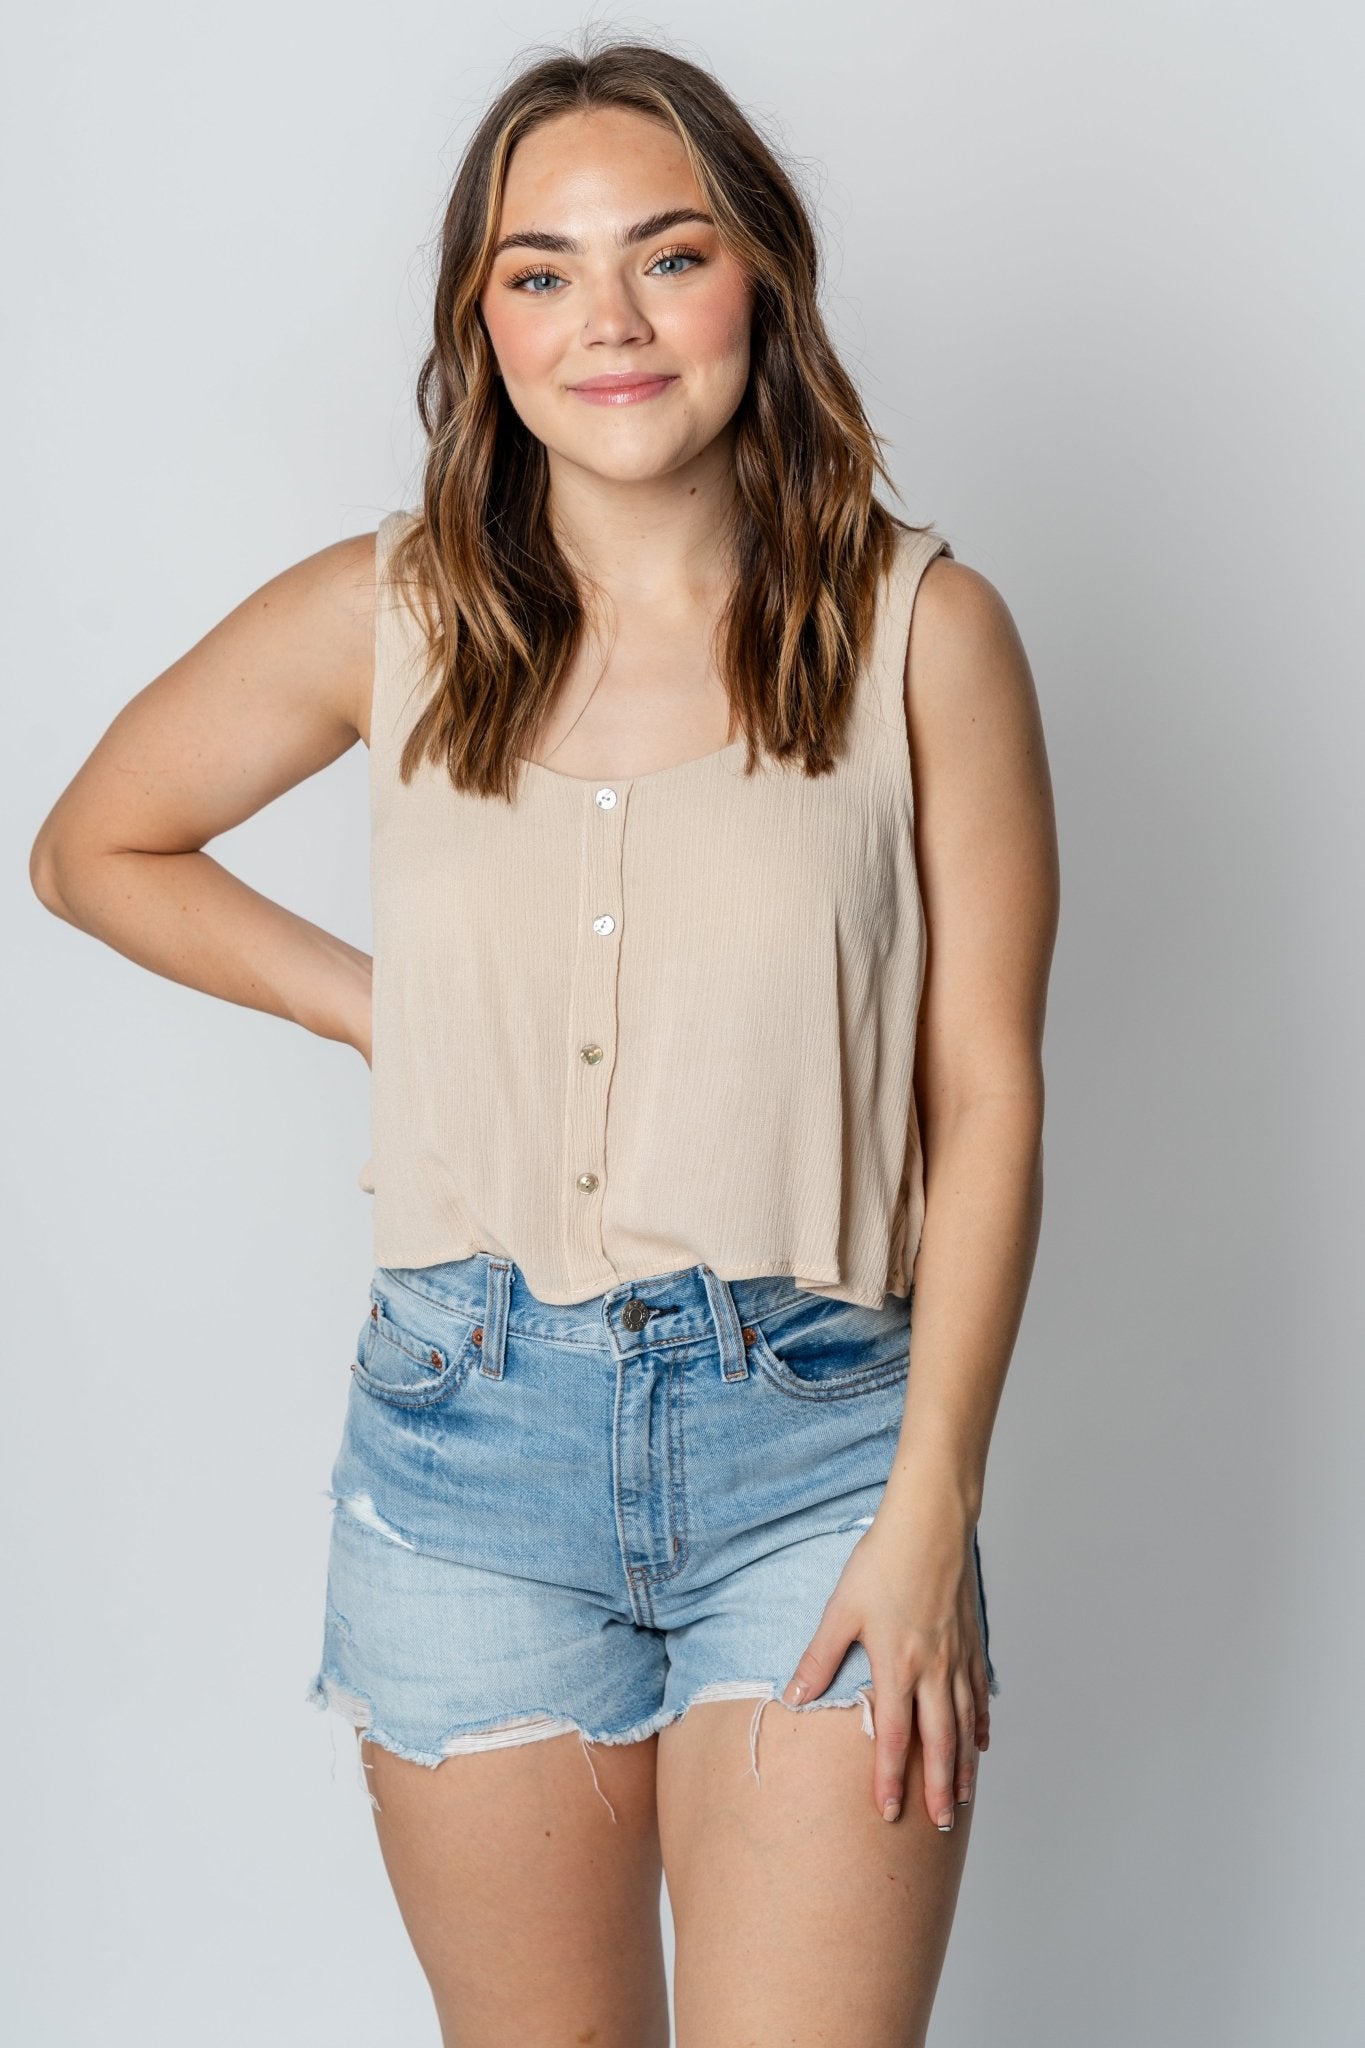 Cropped button tank top cream - Affordable Top - Boutique Tank Tops at Lush Fashion Lounge Boutique in Oklahoma City